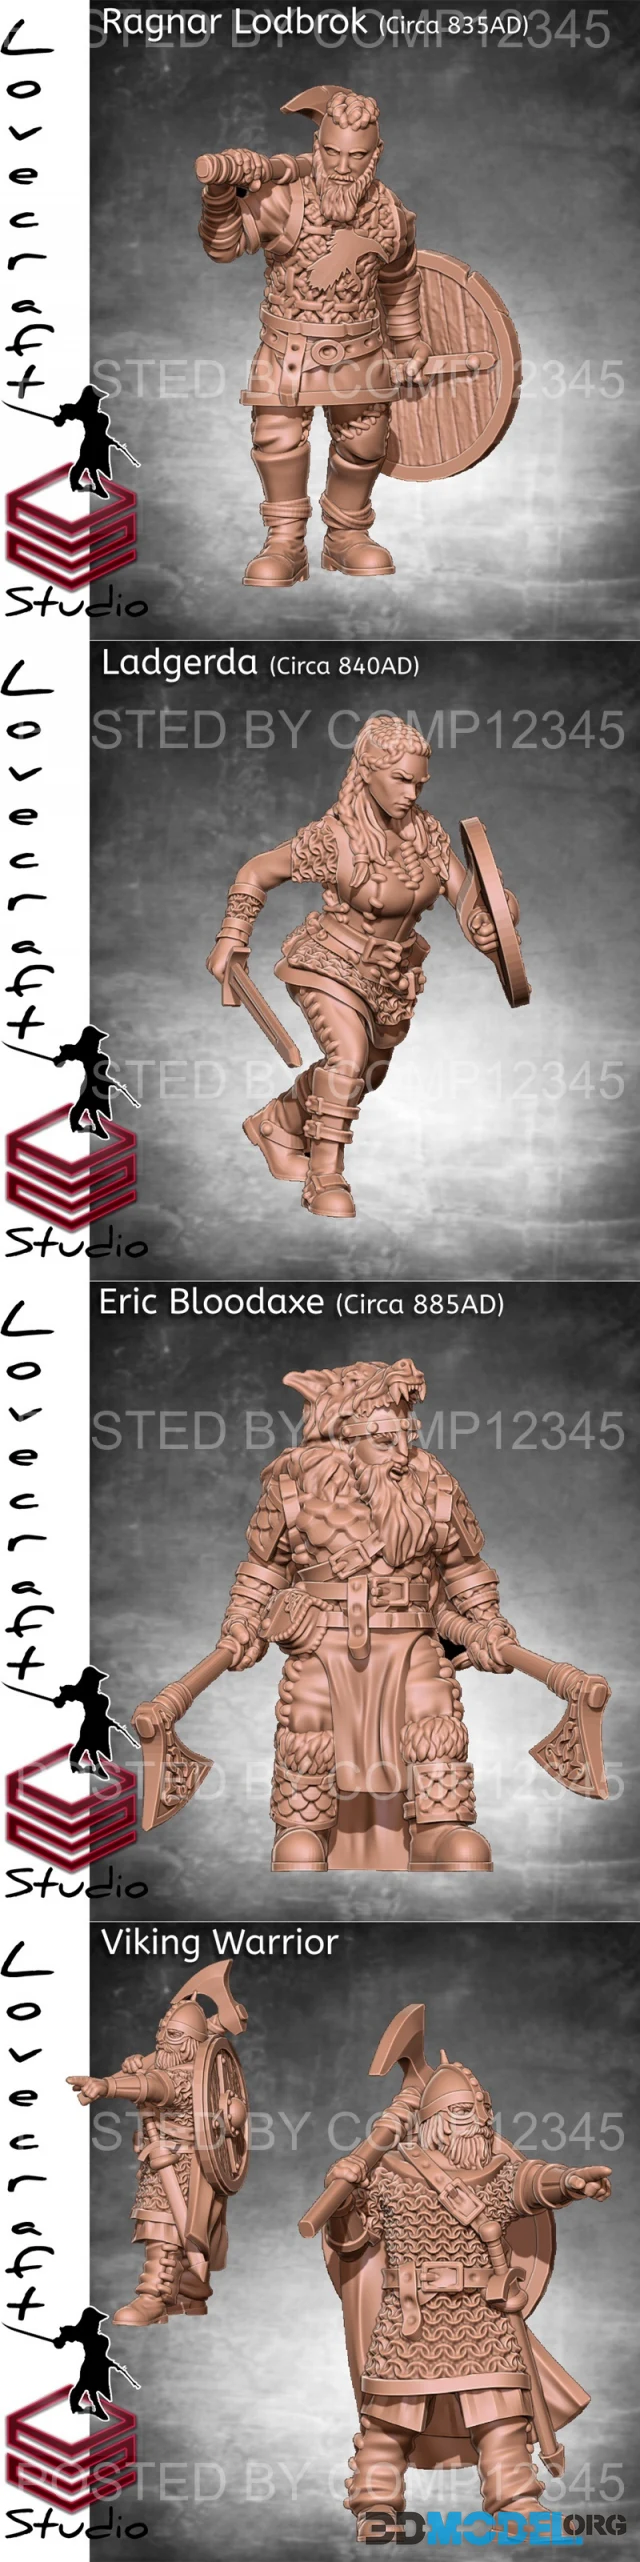 Ragnar Lodbrok and Ladgertha and Eric Bloodaxe and Warrior – Printable